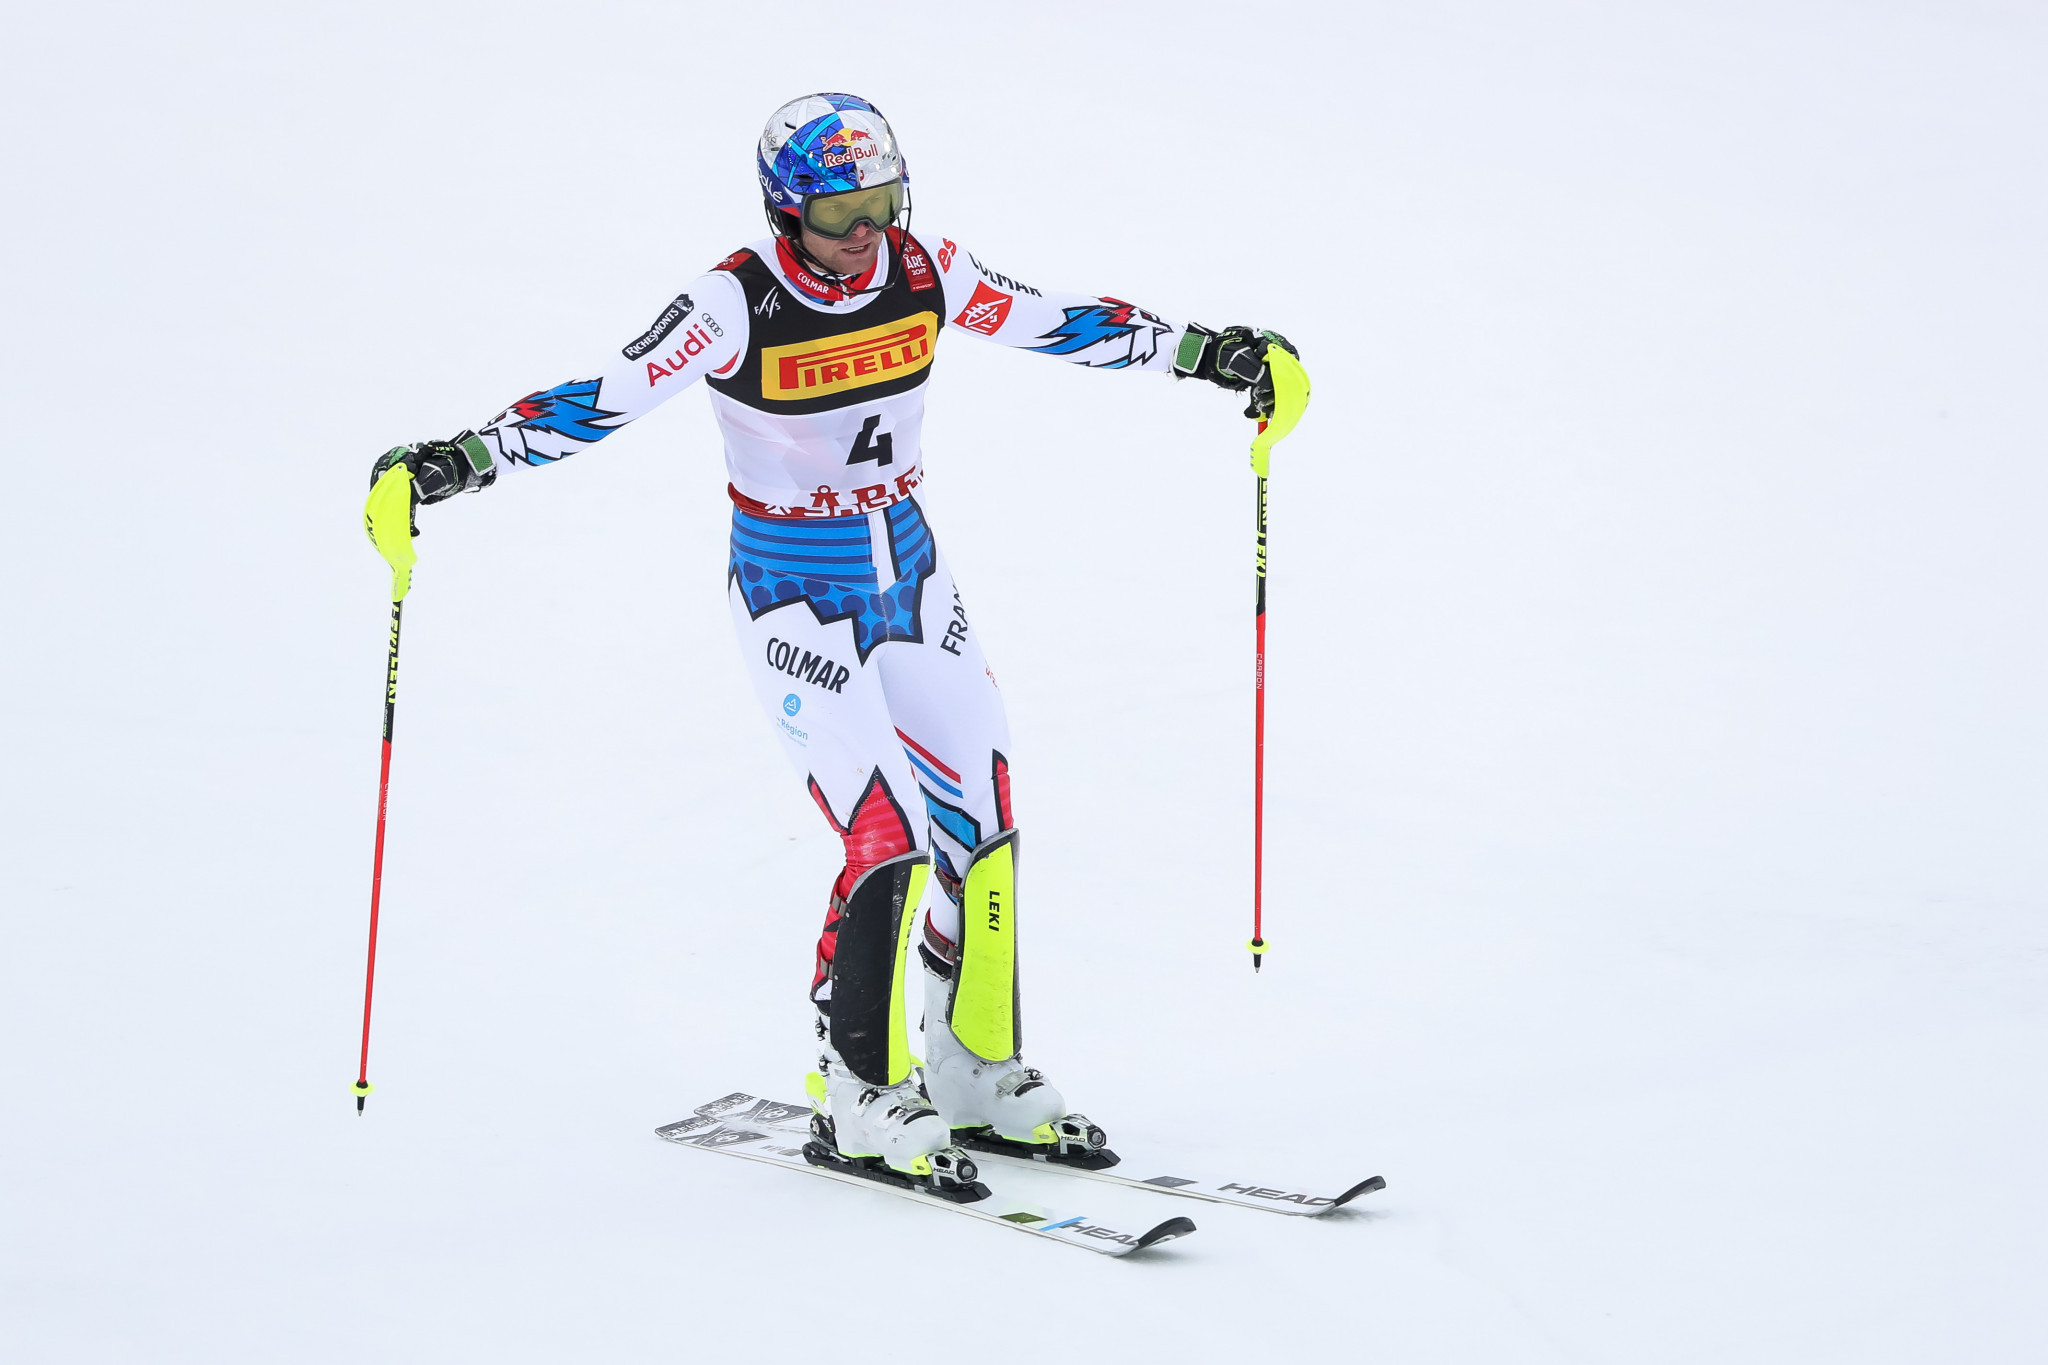 France's newly-crowned Alexis Pinturault will go for the win in the Alpine combined at the FIS Alpine Skiing World Cup in Bansko ©Getty Images